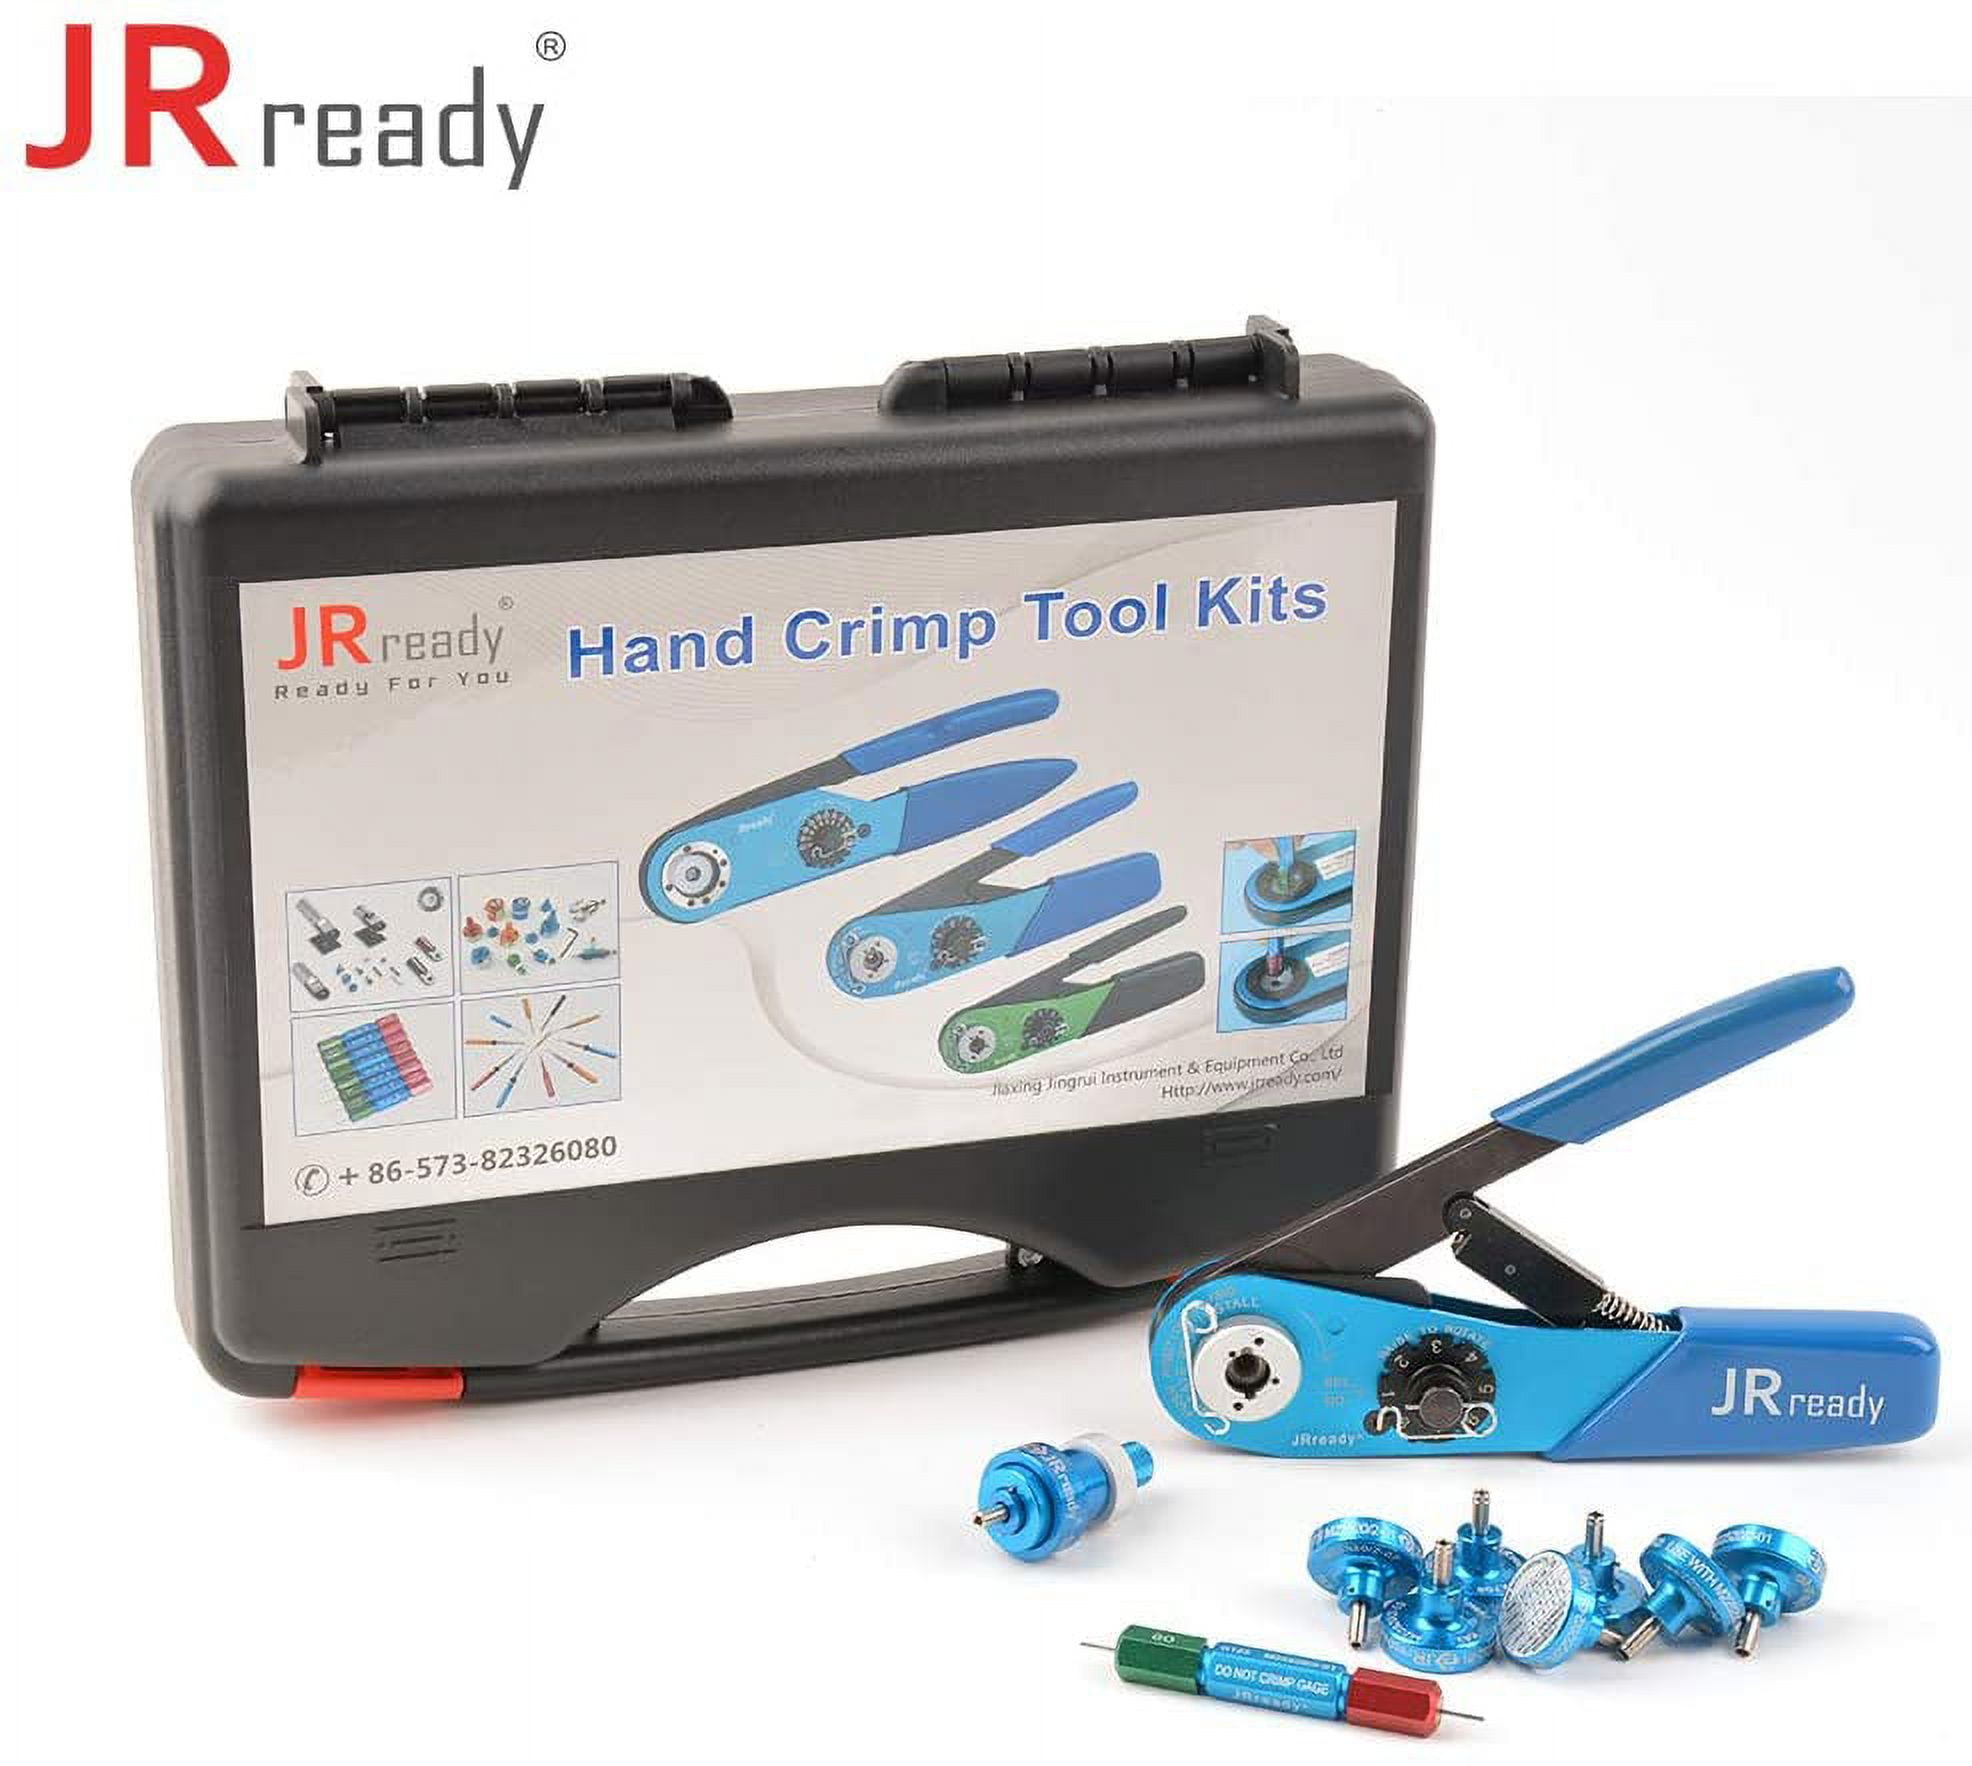 Contact for 2 Barrel Tool M22520 20 Electronic YJQ Kit 32awg 01 G125 and Miniature 615717 Aviation Solid Positioner of Connector and JRready W1A Systems Crimp in Indent Crimper ST2060 7 Gauge